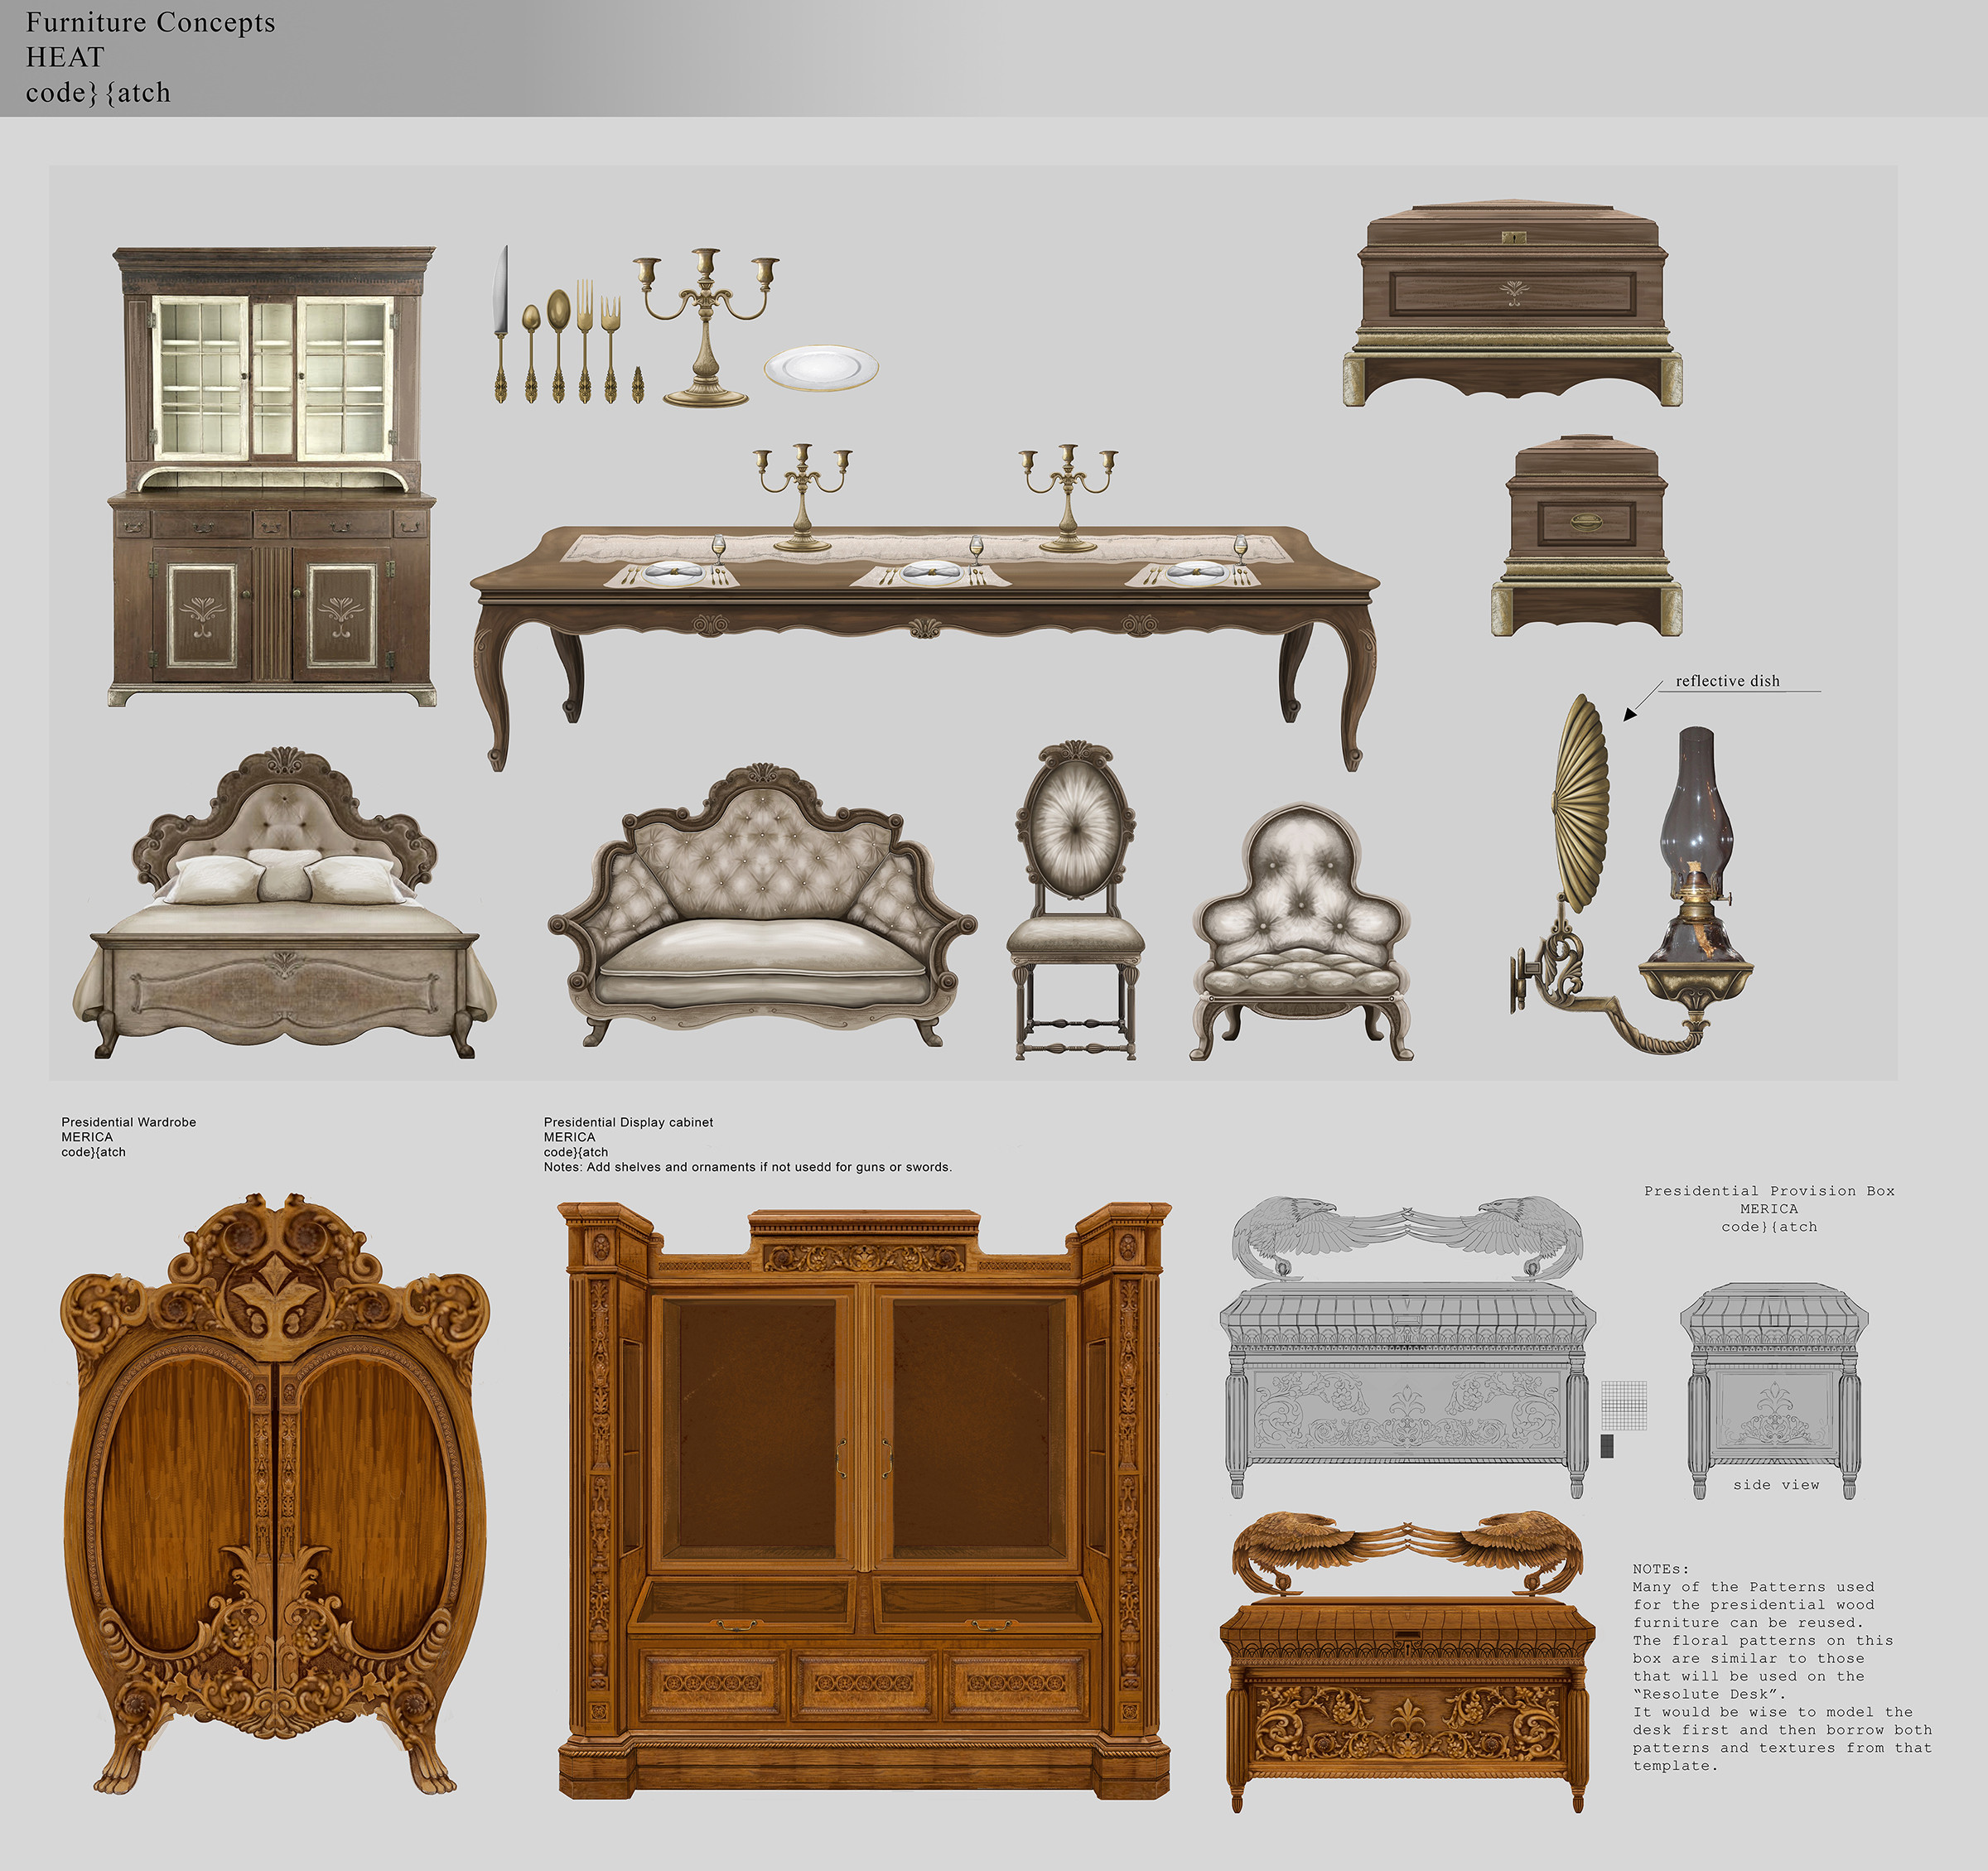 Furniture Props. The Walnut Hardwood was not used but some selections of the pale furniture were implemented.